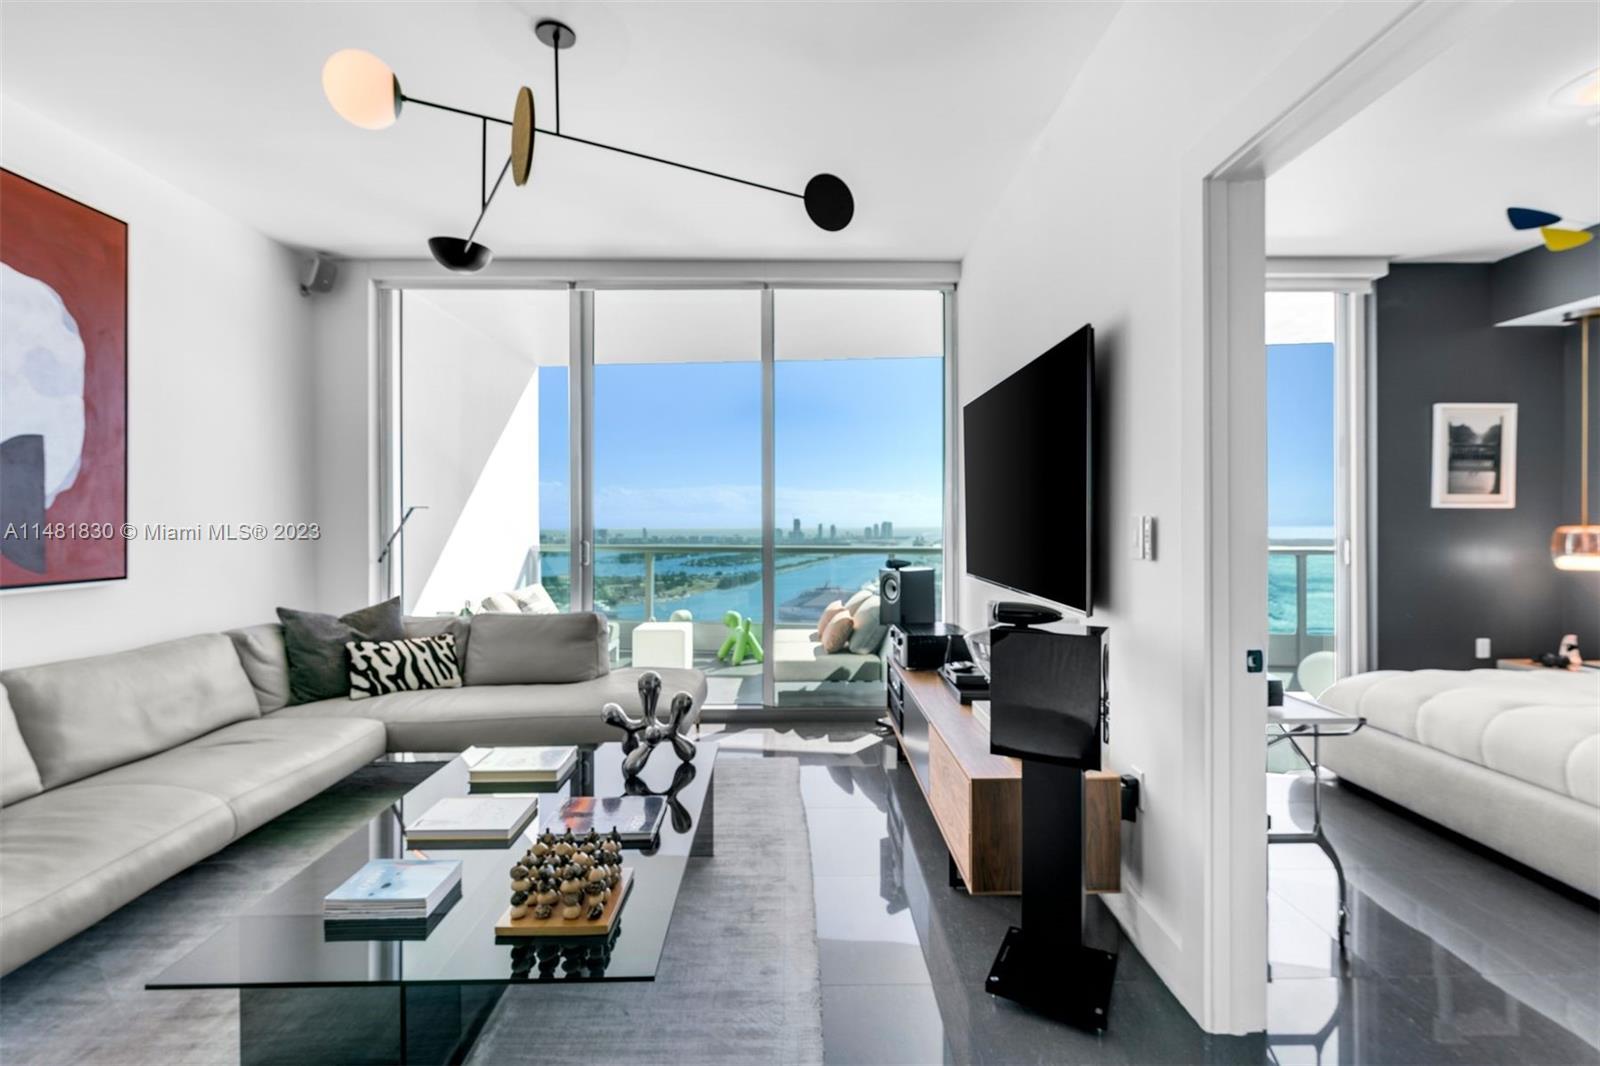 An impeccably designed 1 Bed + Den/ 2 Bath condo at 900 Biscayne Bay with 912 interior square feet, 9-foot-8-inch-high floor-to-ceiling glass windows, motorized shades, and a spacious terrace overlooking Biscayne Bay and the Atlantic Ocean from the 46th floor. Building amenities include a resort-style pool, lap pool, hot tub, fully-equipped fitness center, men's and women's sauna and steam room, movie theater, BBQ area, clubroom, full-service concierge, valet parking service, and a children's playroom. Within walking distance of the Miami Heat Arena, Bayside Marketplace, Maurice A. Ferre Park, the Adrienne Arsht Center for the Performing Arts, and shops and restaurants at Miami Worldcenter.